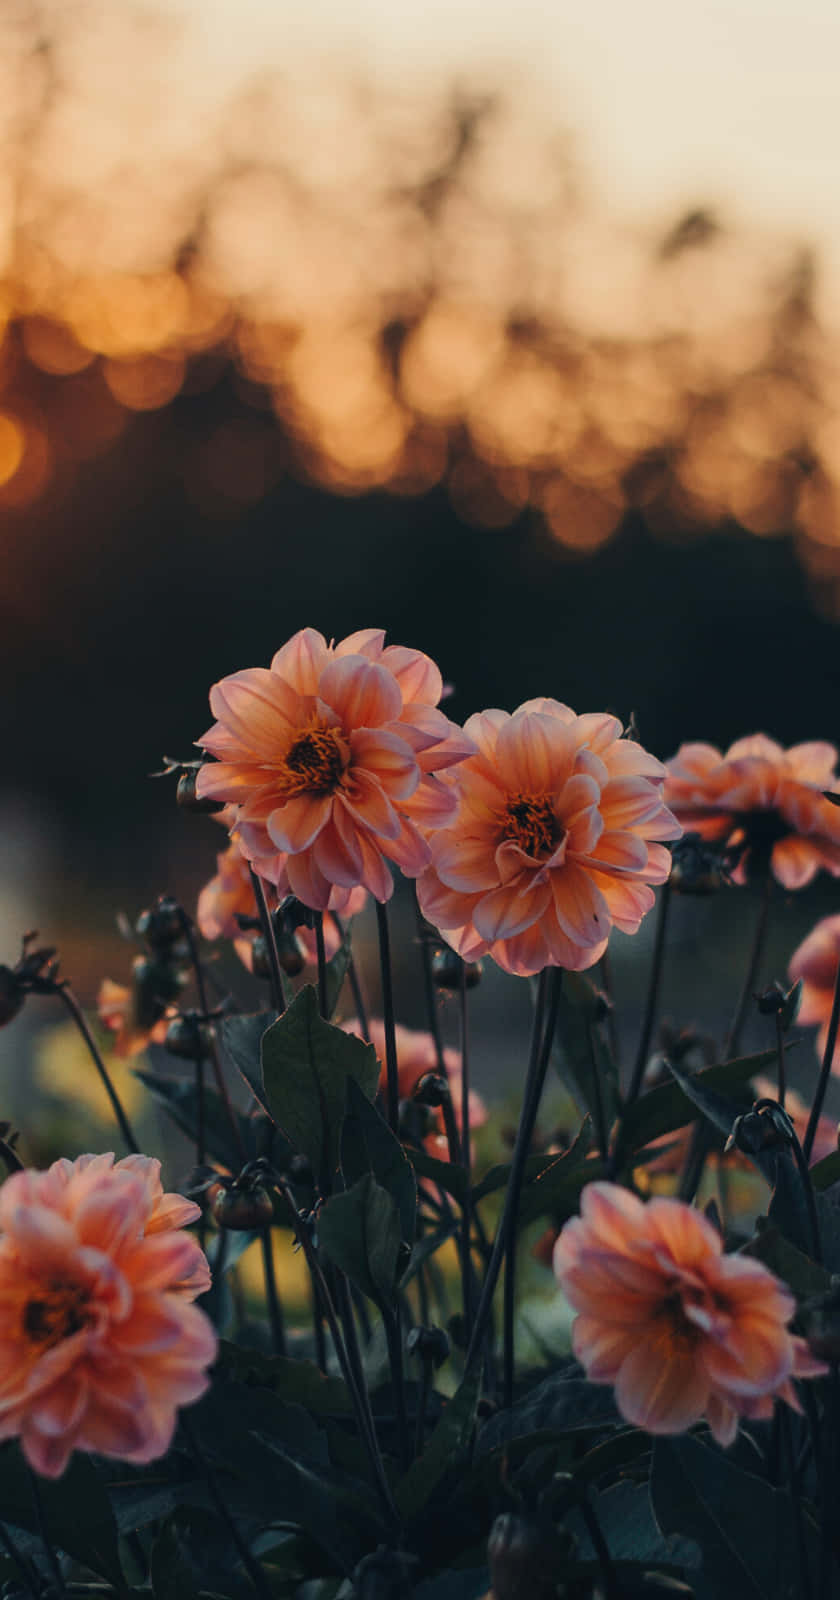 Flowers At Sunset In Front Of A Sunset Wallpaper